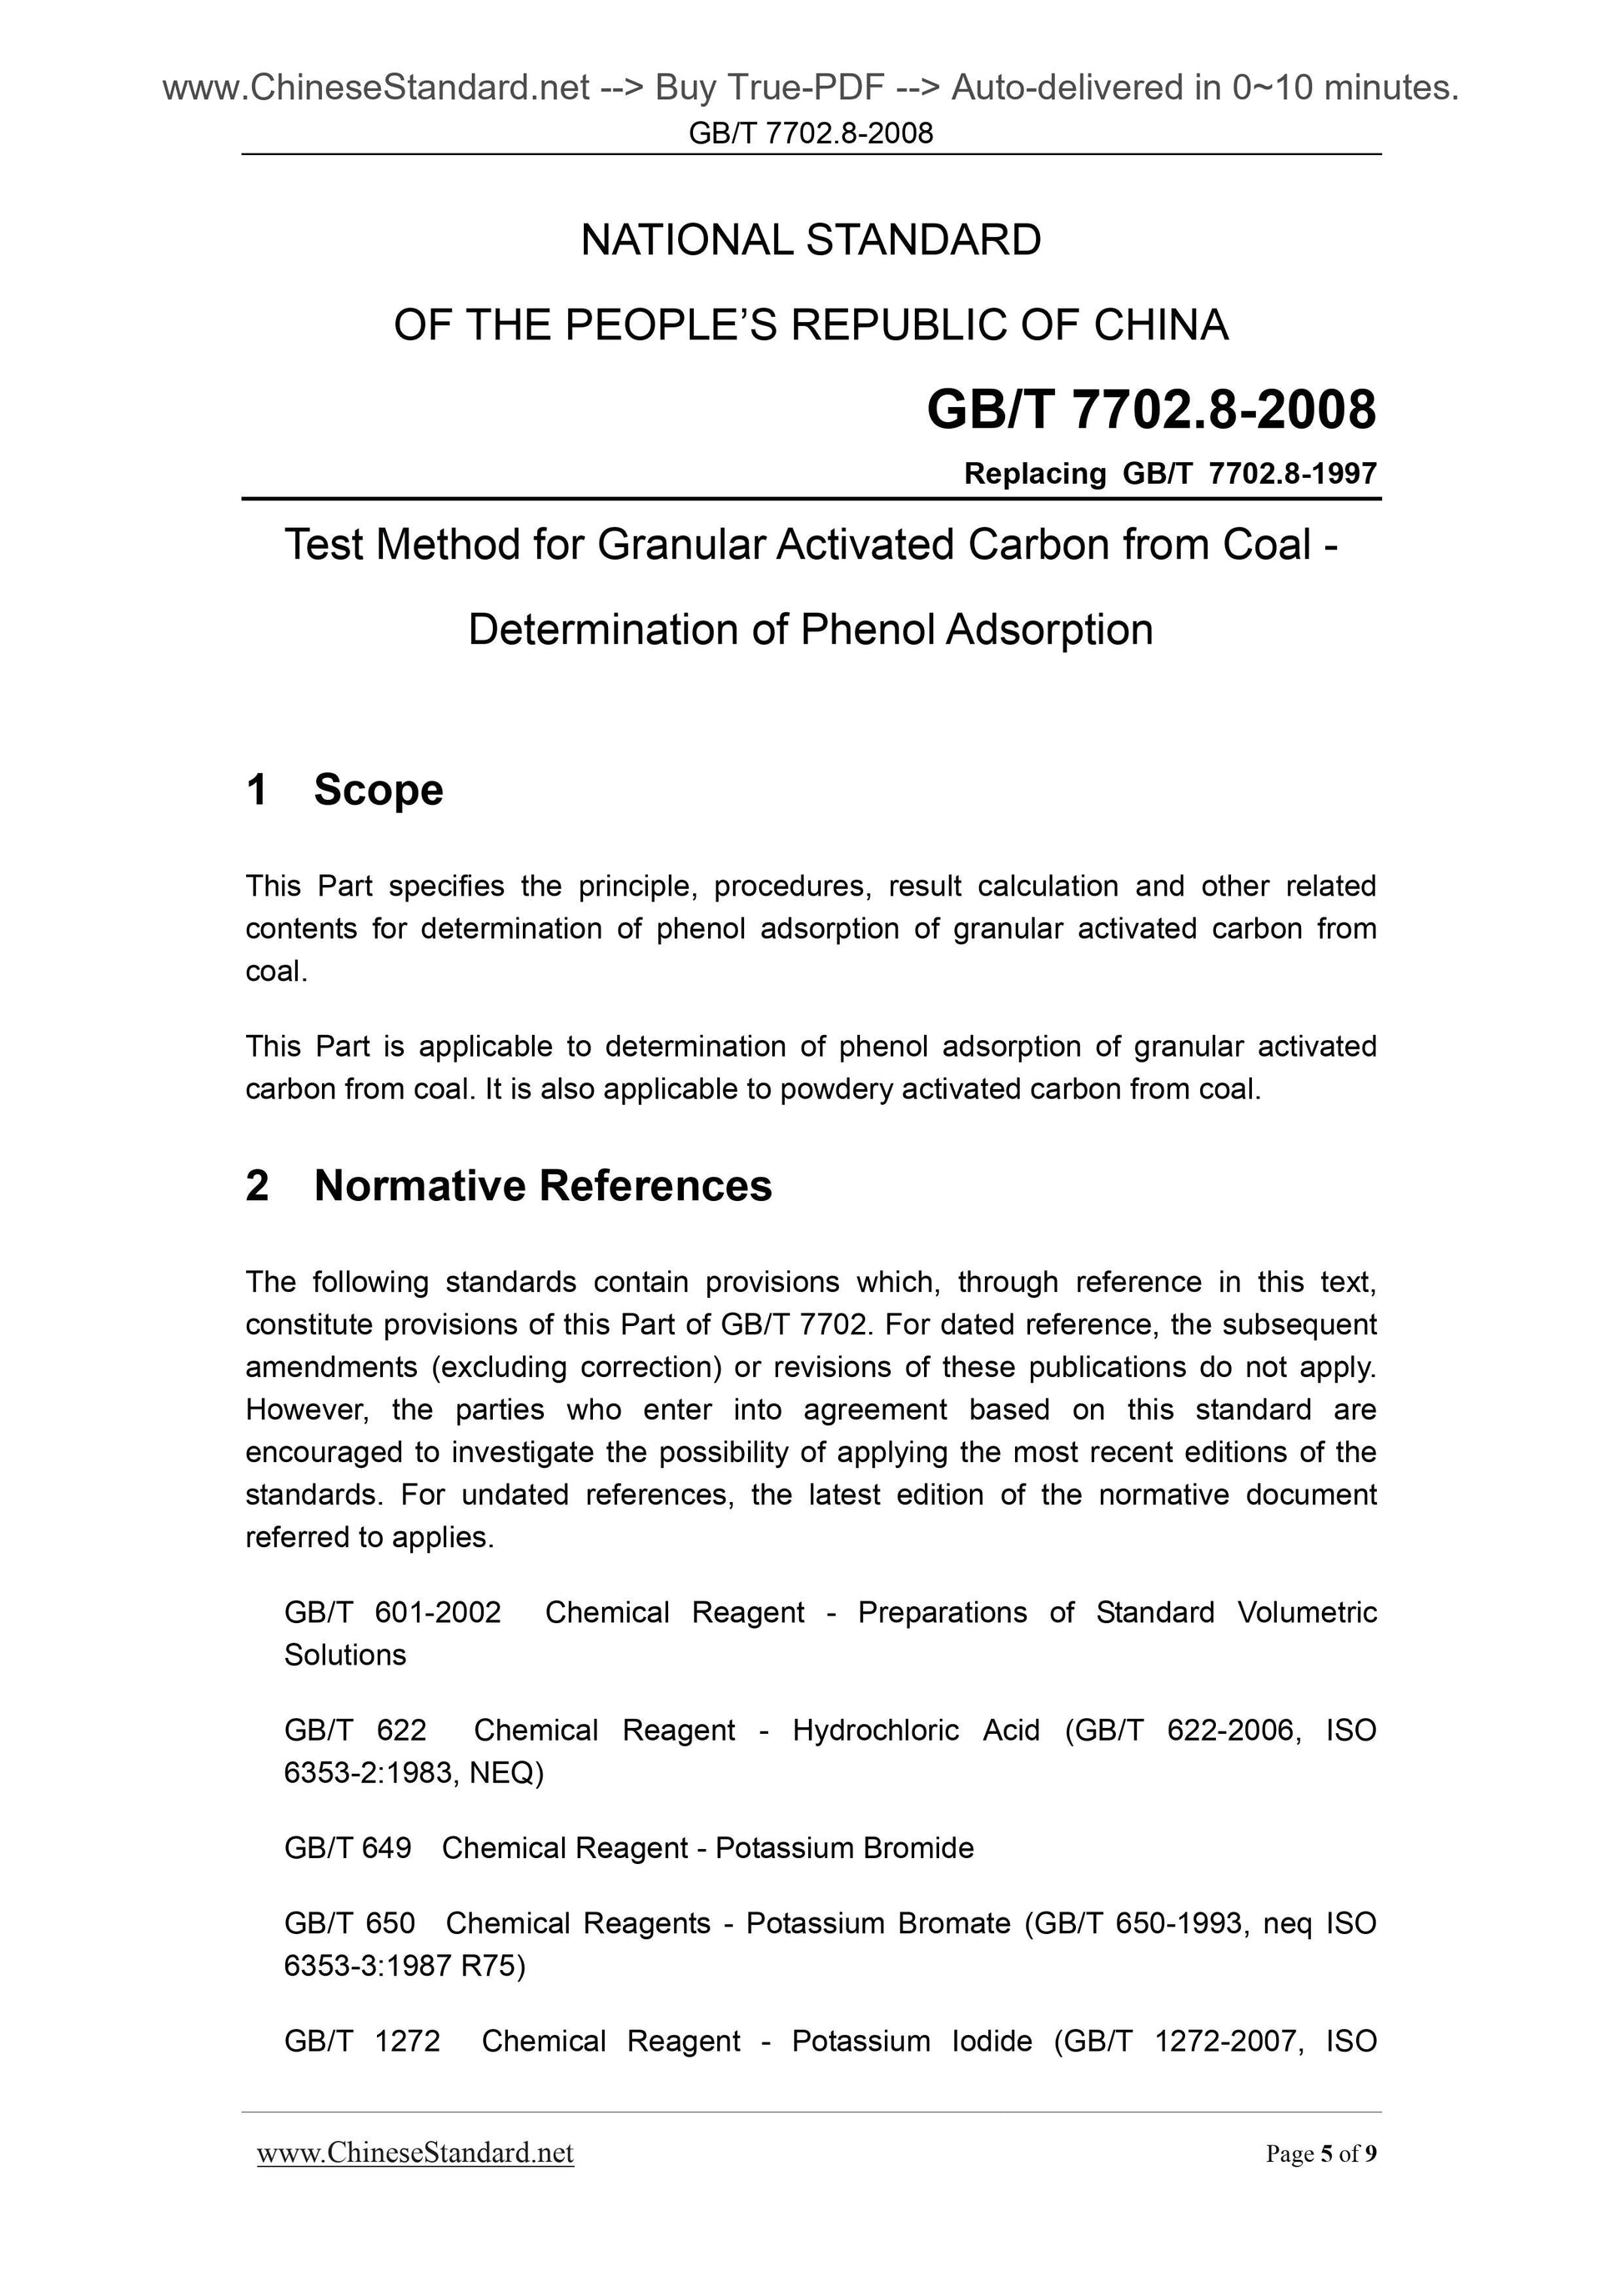 GB/T 7702.8-2008 Page 5